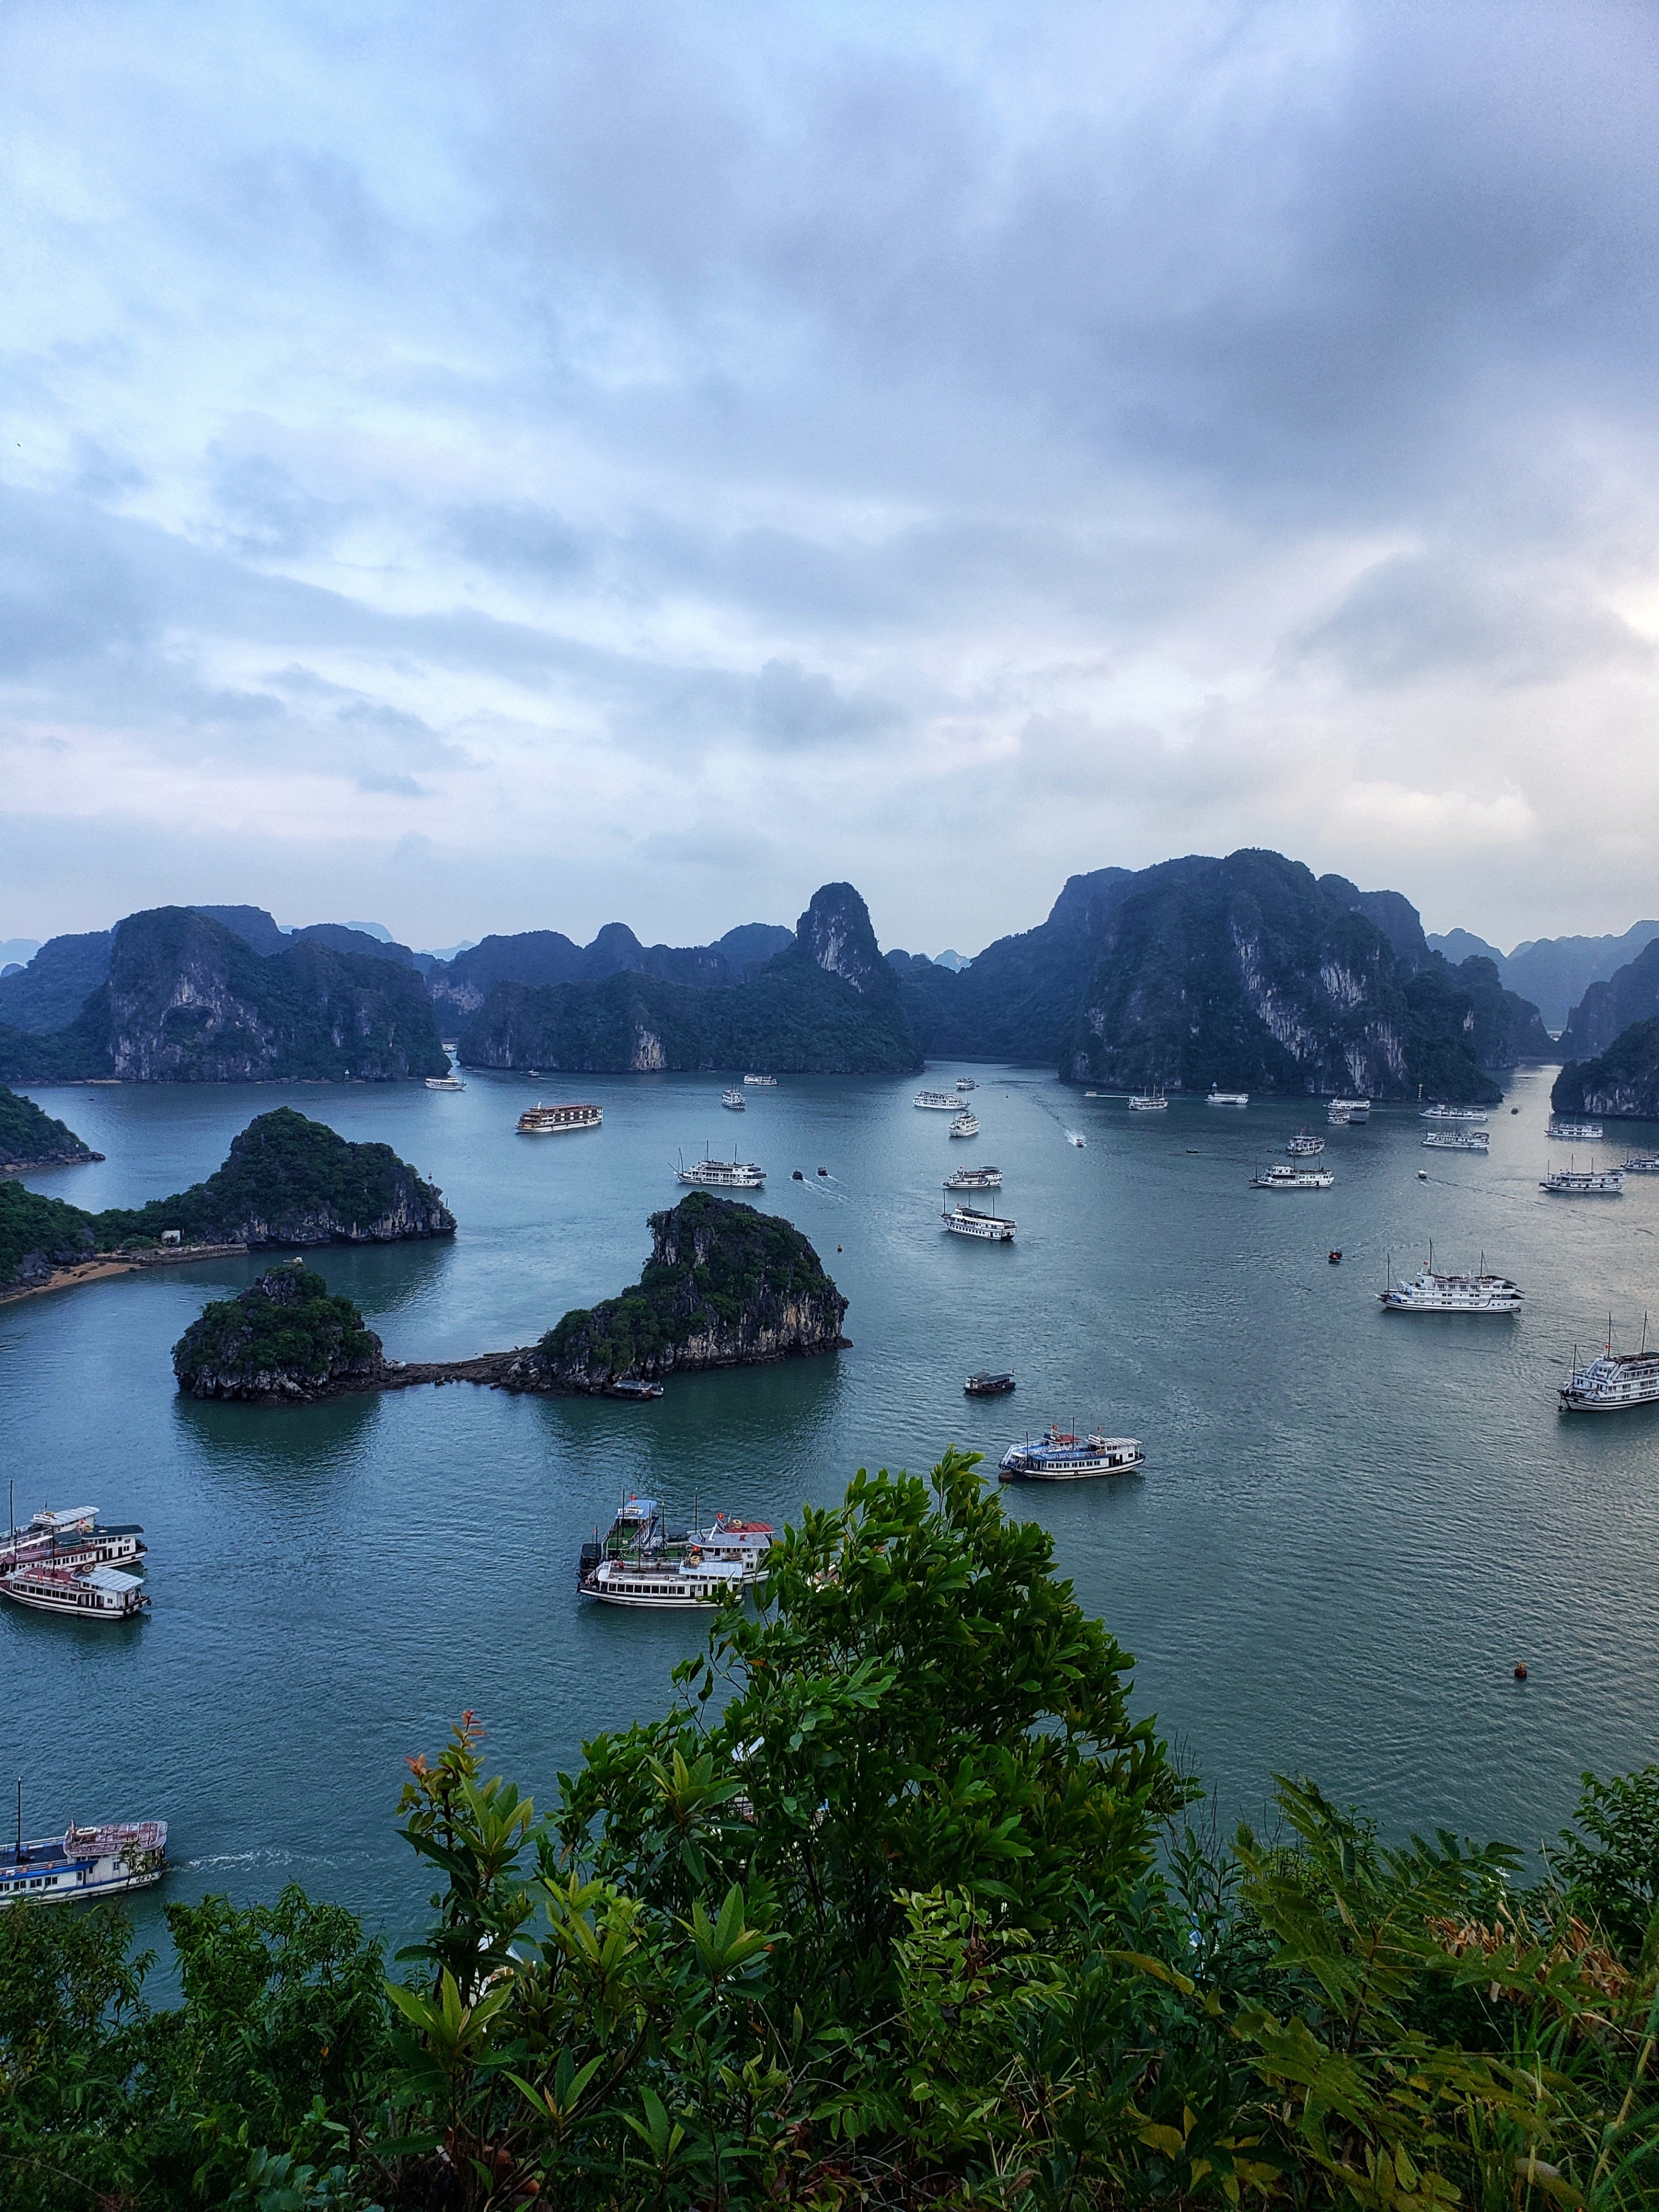 In Halong Bay on 🔝 of the beautiful Ti Top Island. This island allows you to walk about 400 steps up, and you'll get this view!

#nature